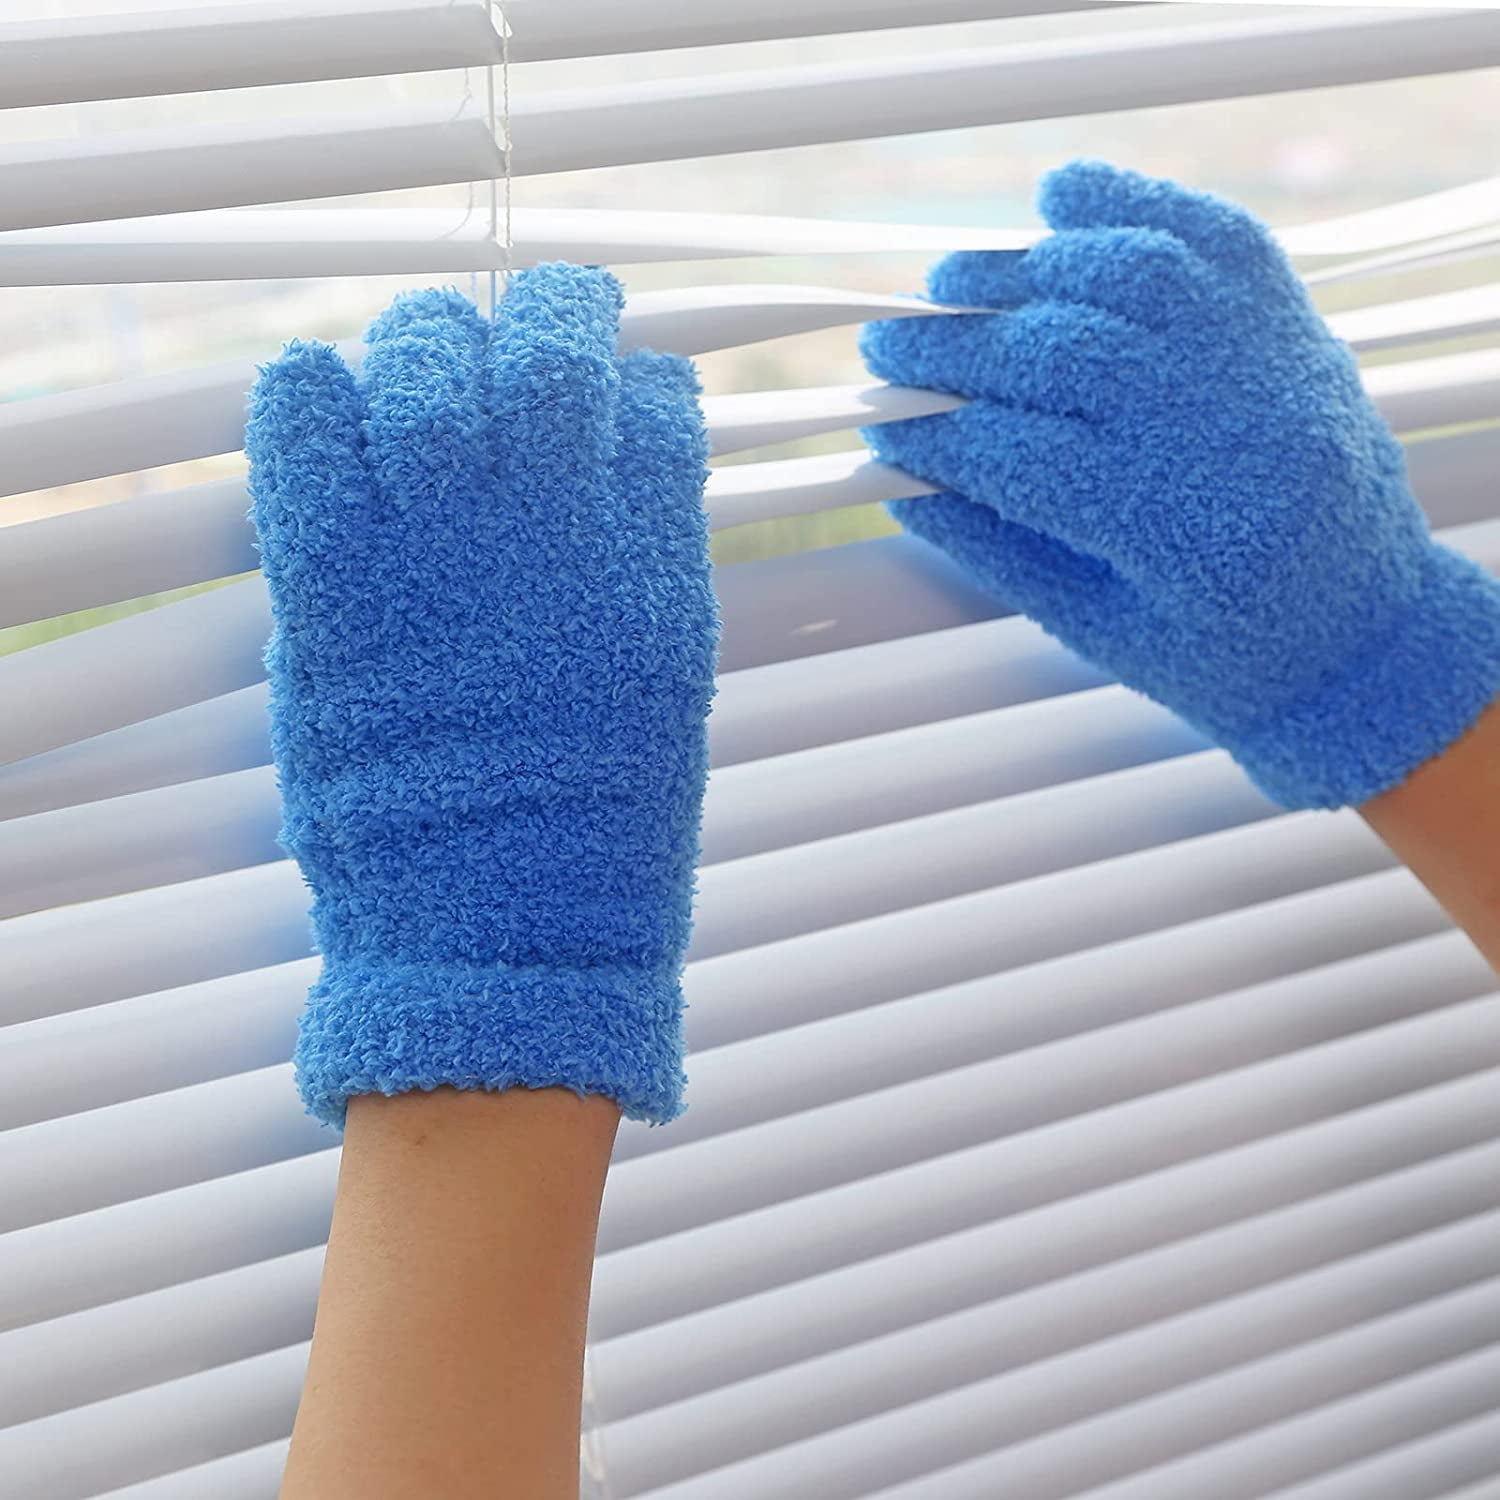 Microfiber Dusting Gloves, Dusting Cleaning Glove for Plants